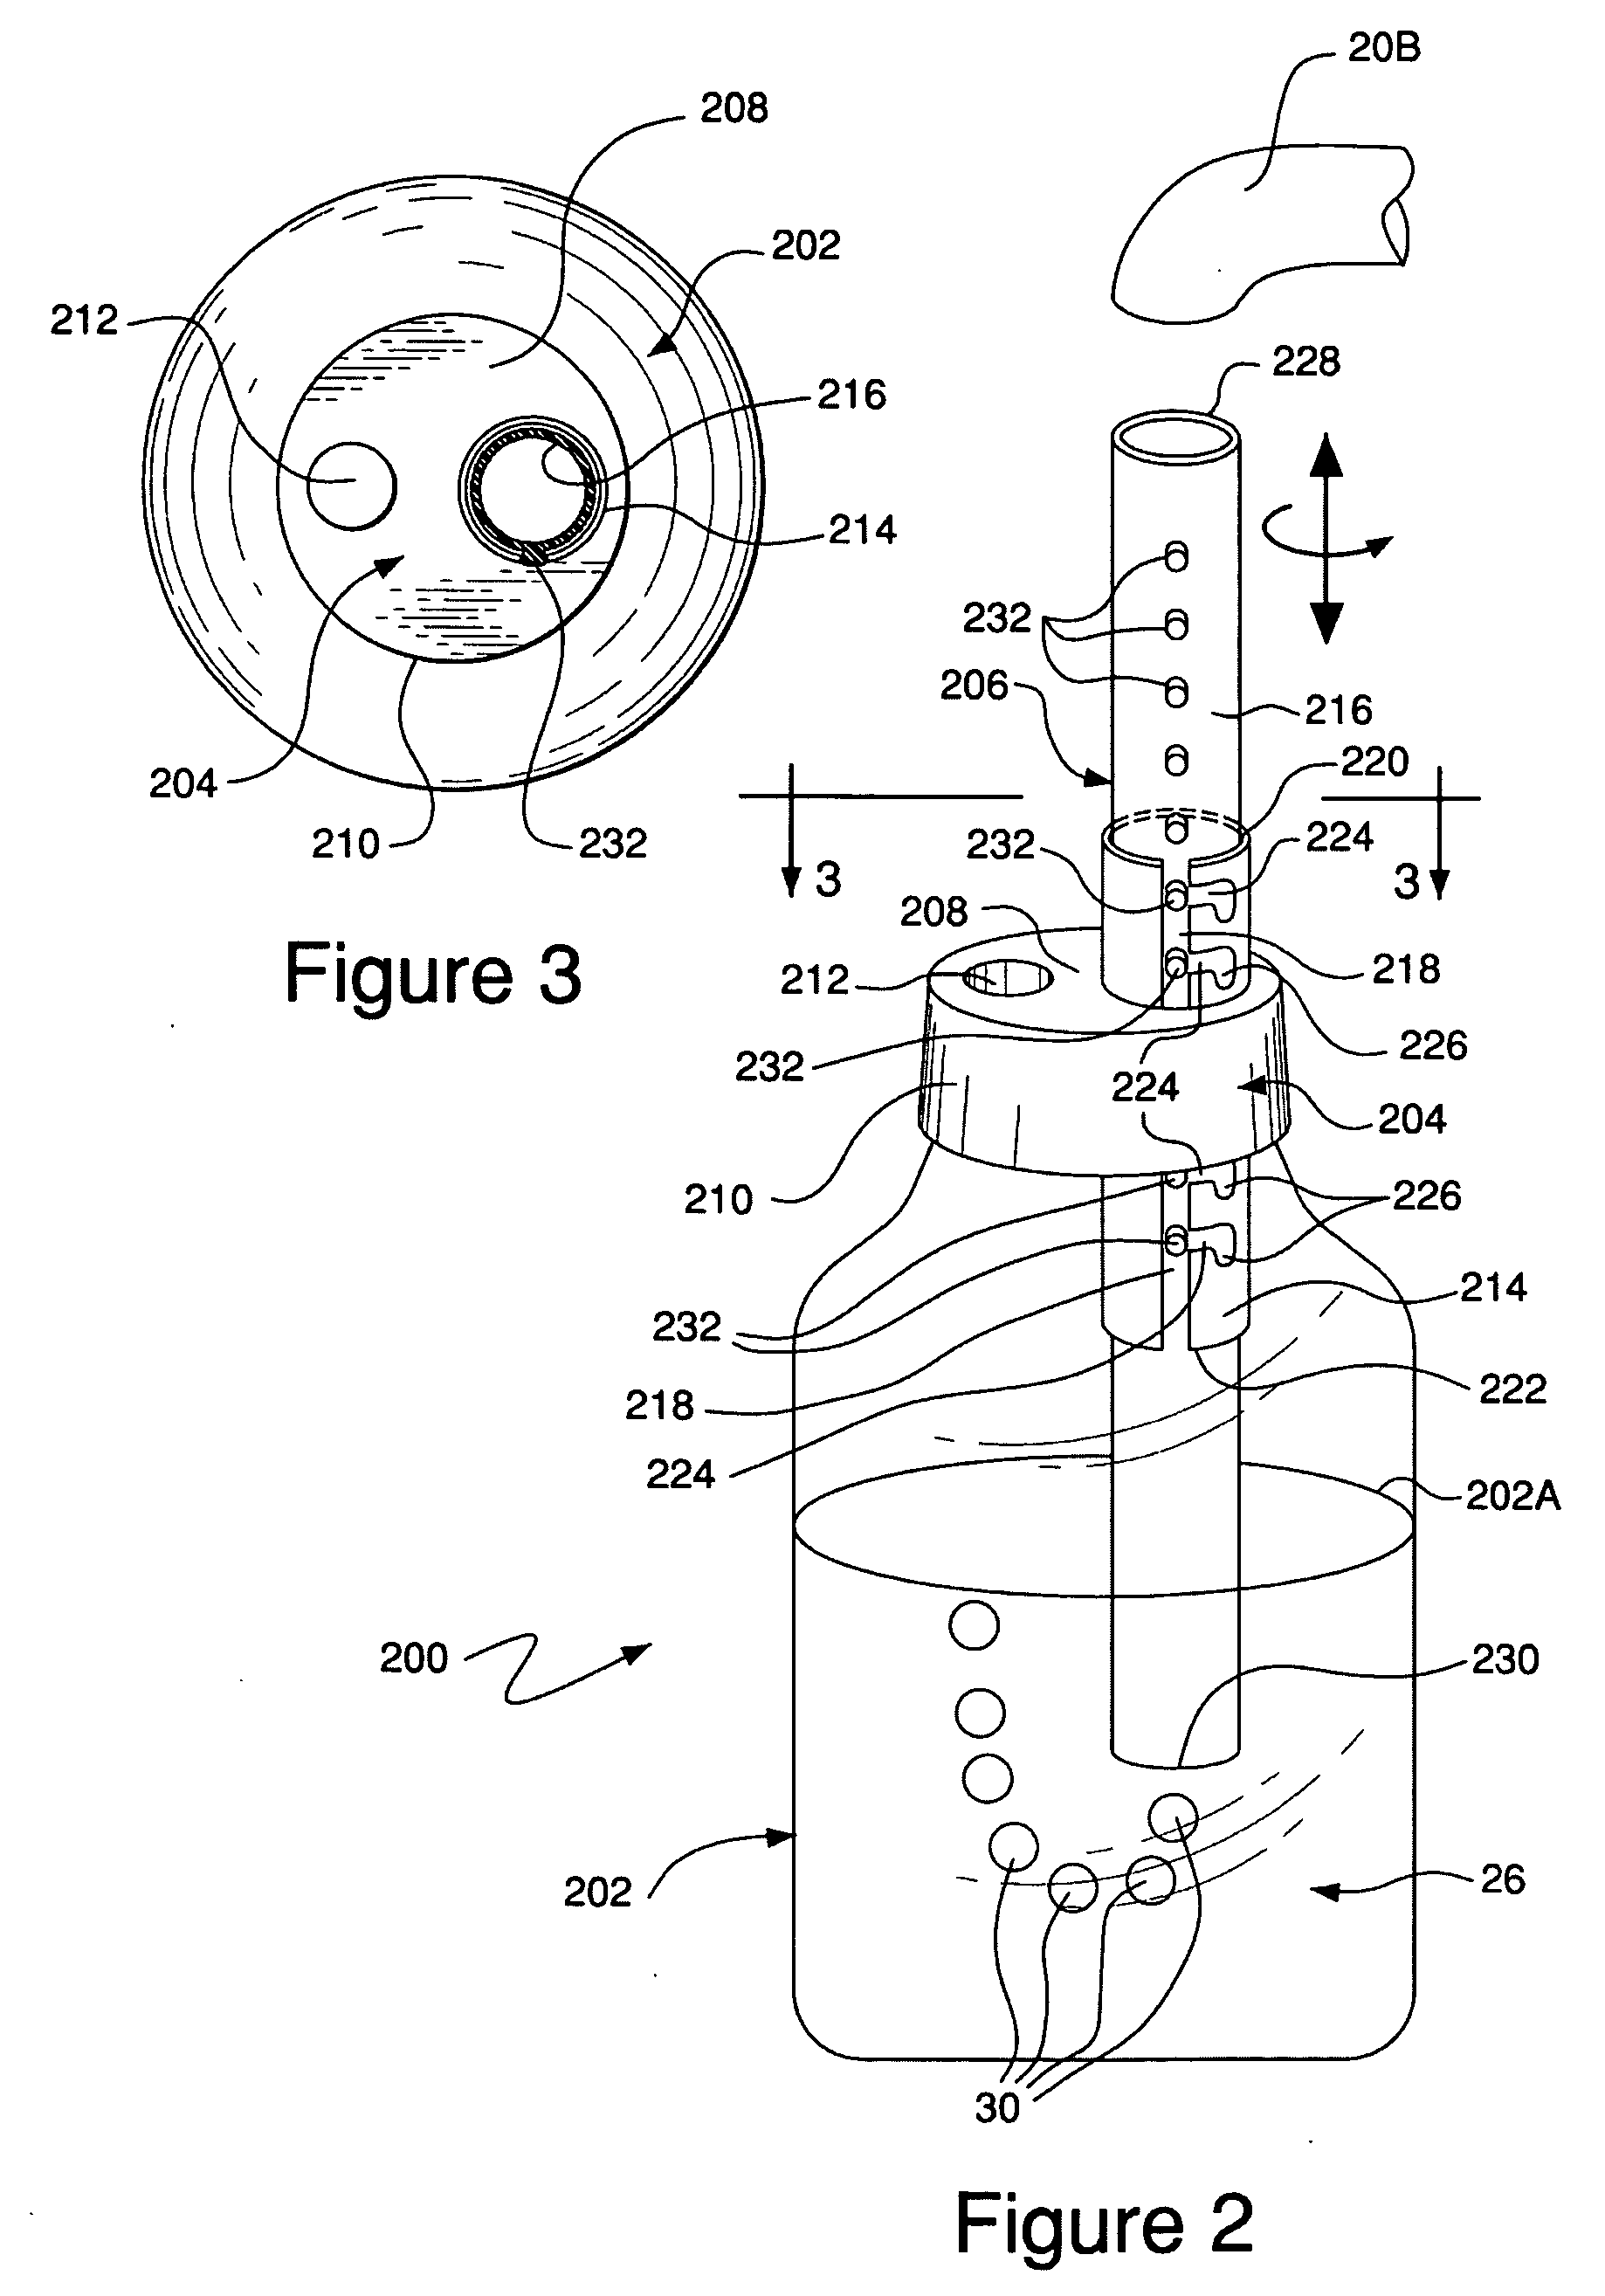 Apparatus for controlling the pressure of gas by bubbling through a liquid, such as bubble CPAP